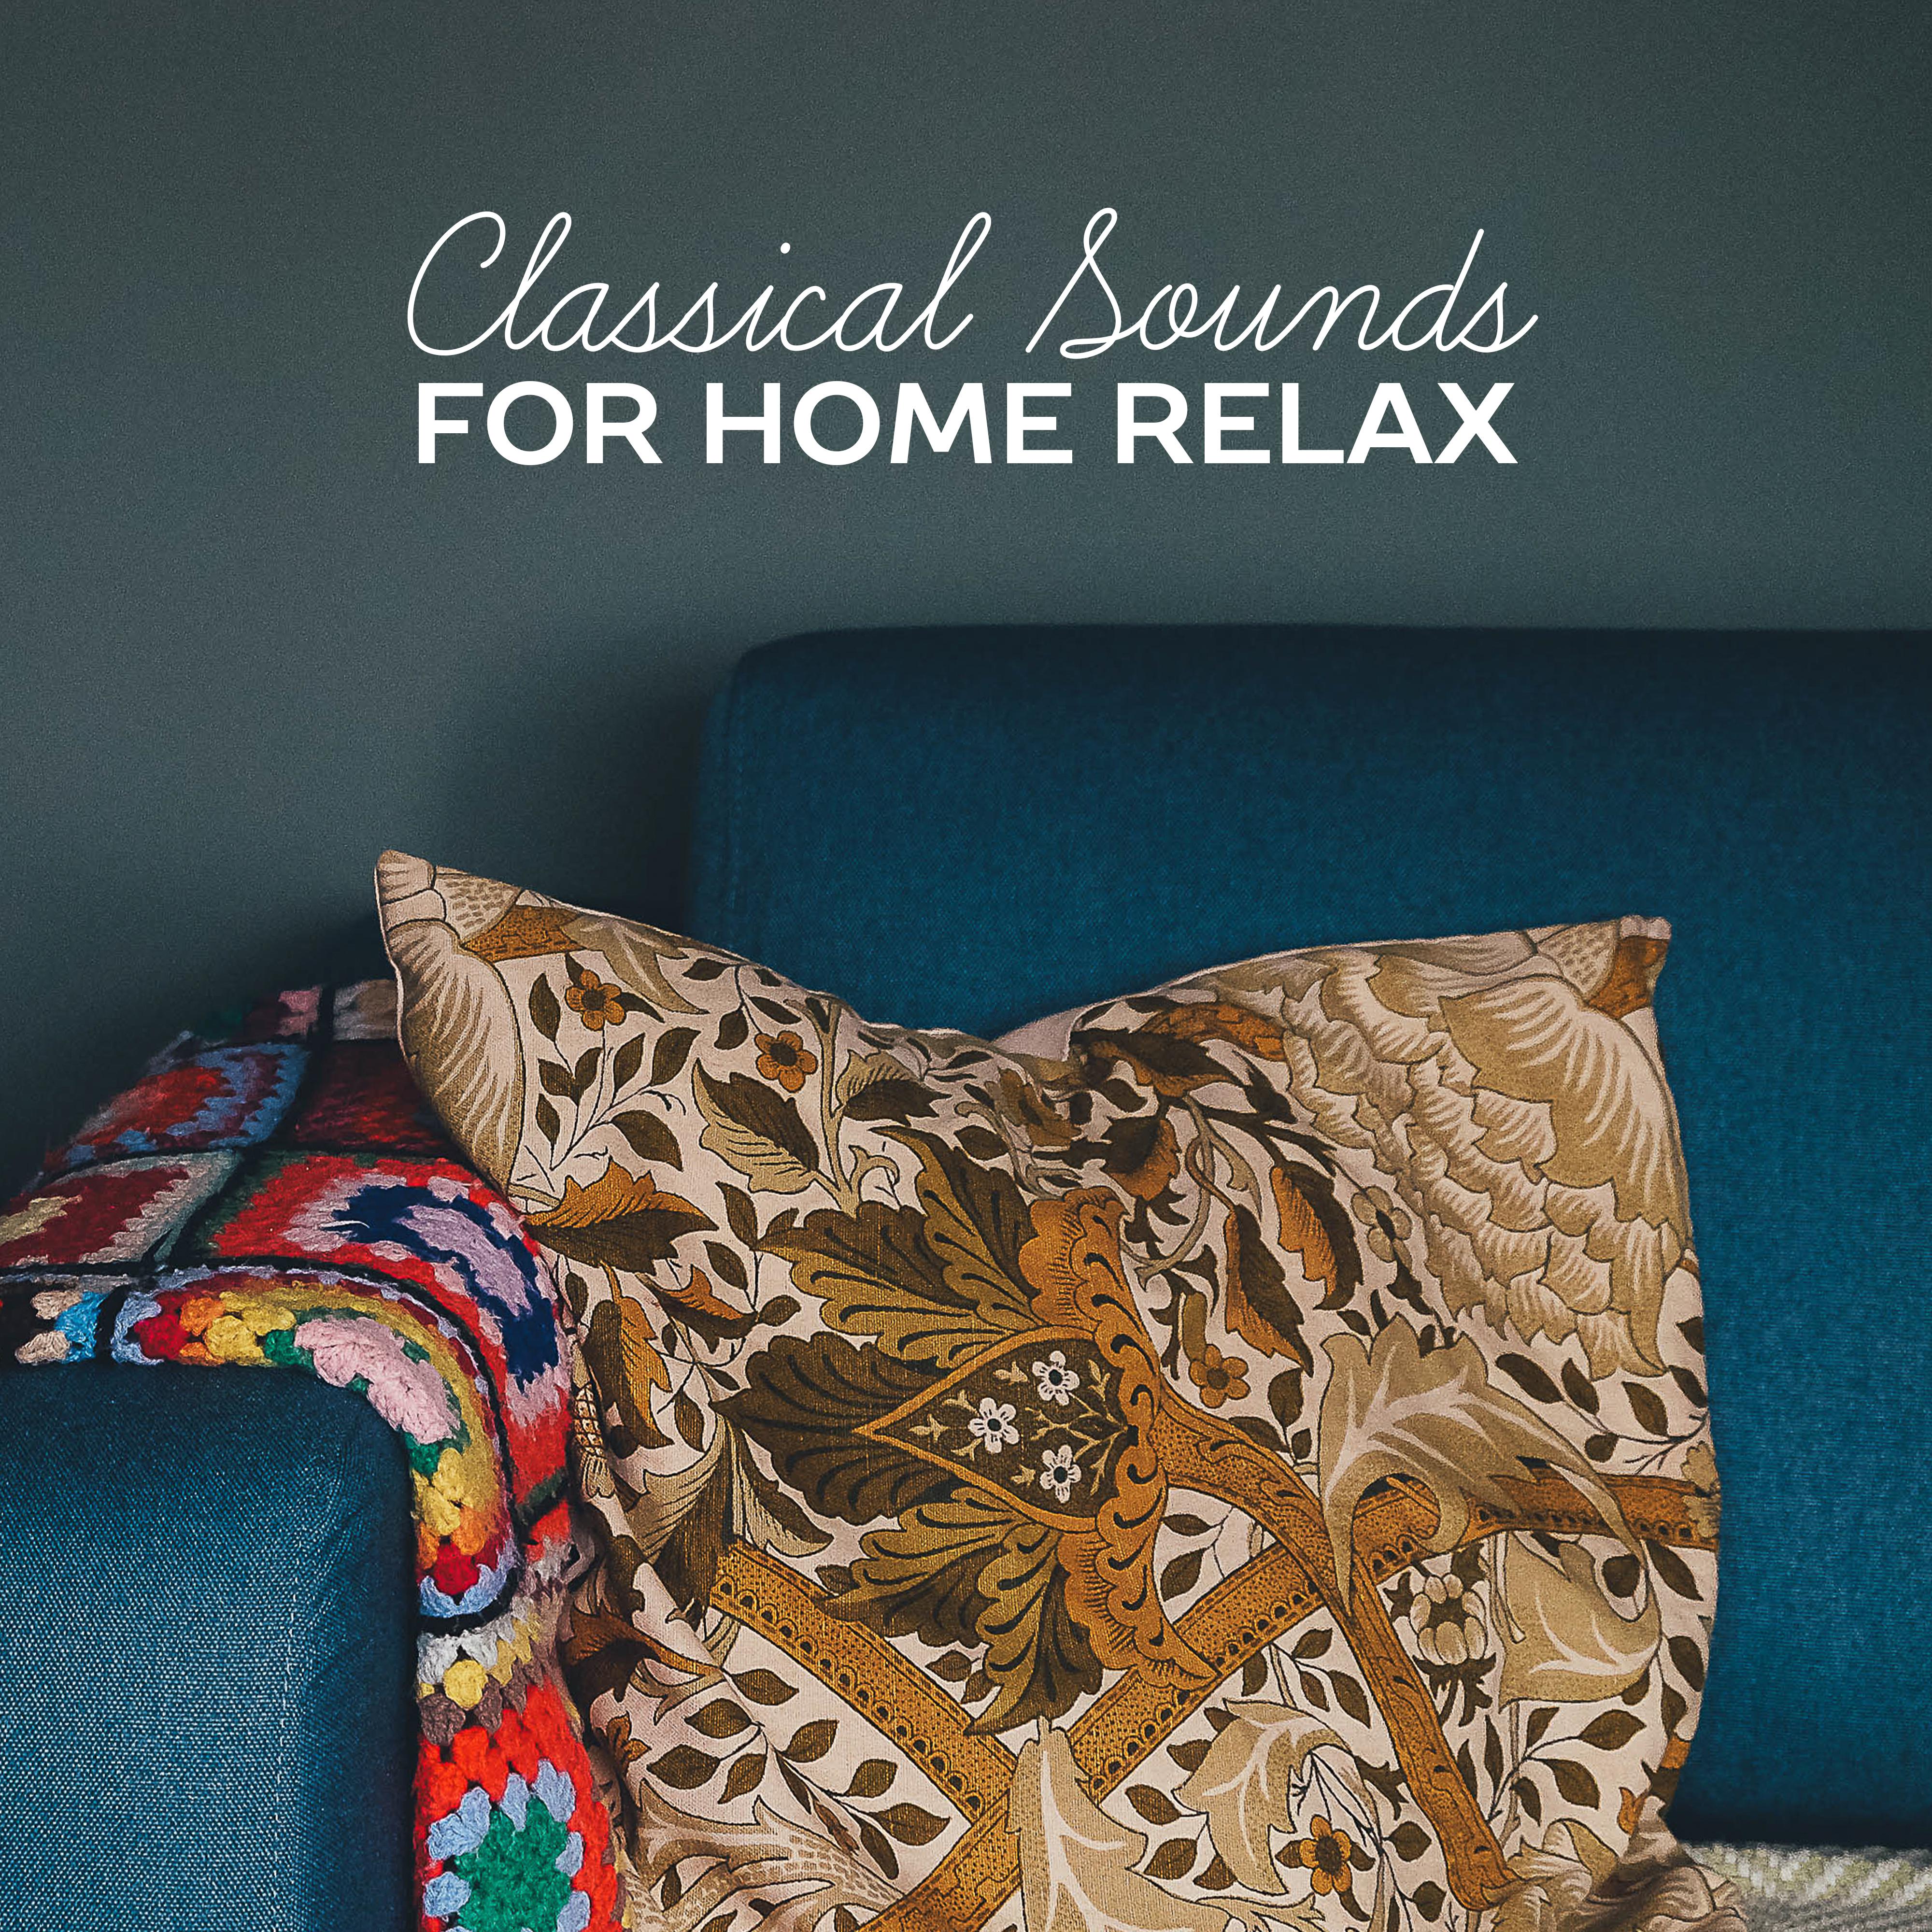 Classical Sounds for Home Relax  Soft Music, Classical Sounds to Rest, Sleep with Classics